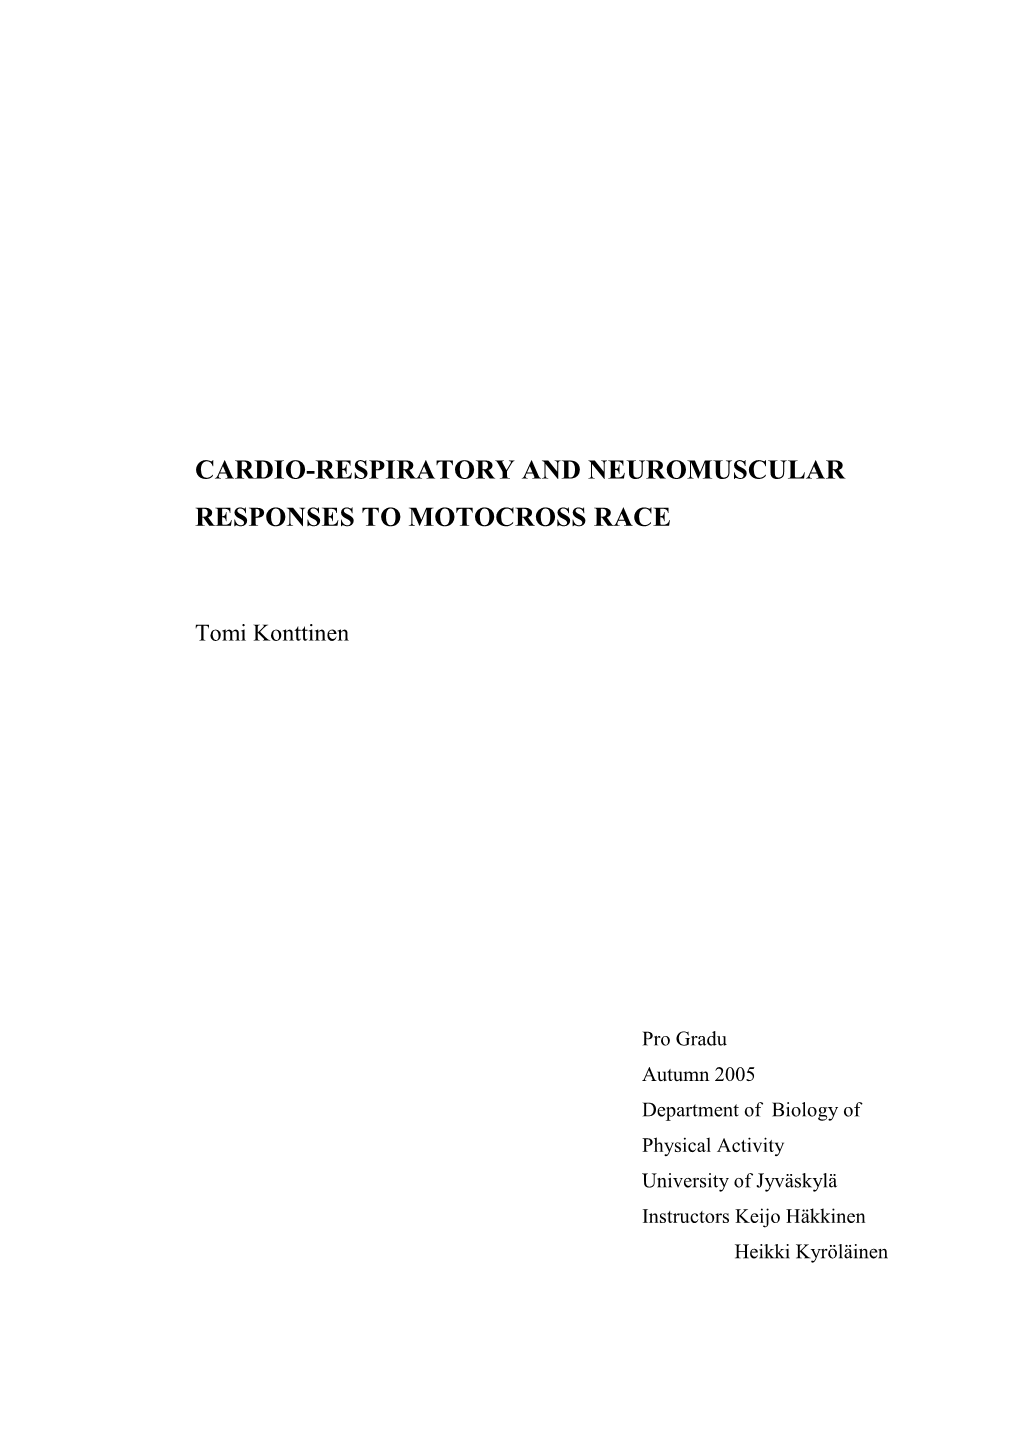 Cardio-Respiratory and Neuromuscular Responses to Motocross Race